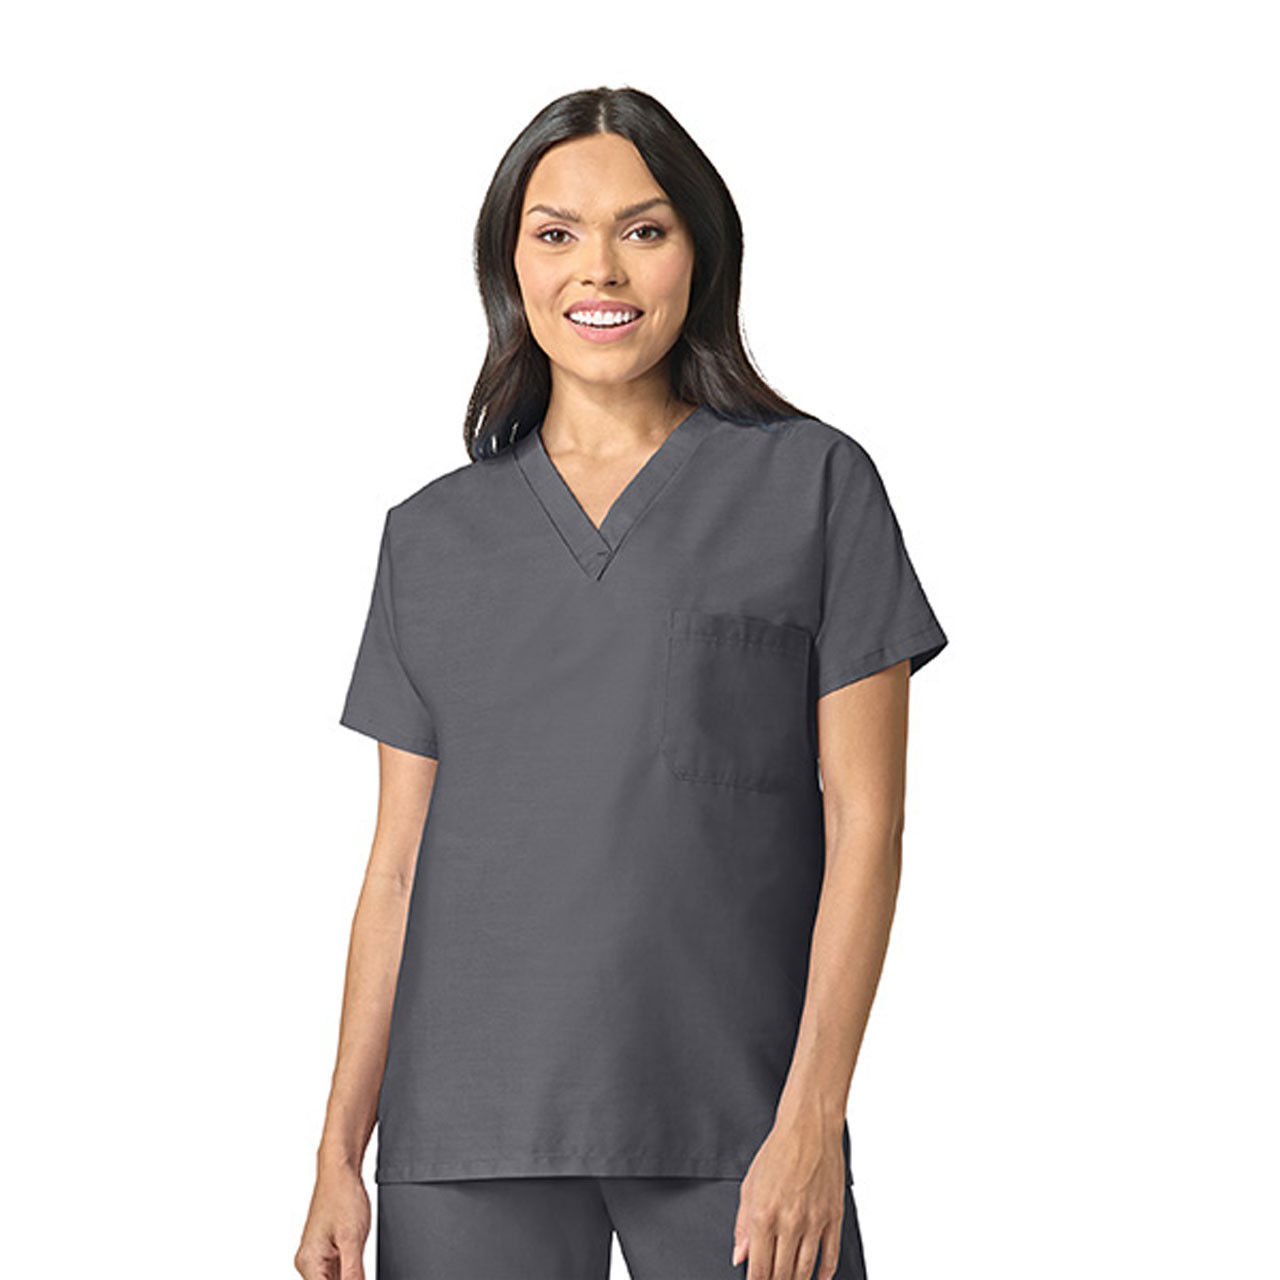 Pewter Gray Scrub Top - Pack of 3 Questions & Answers